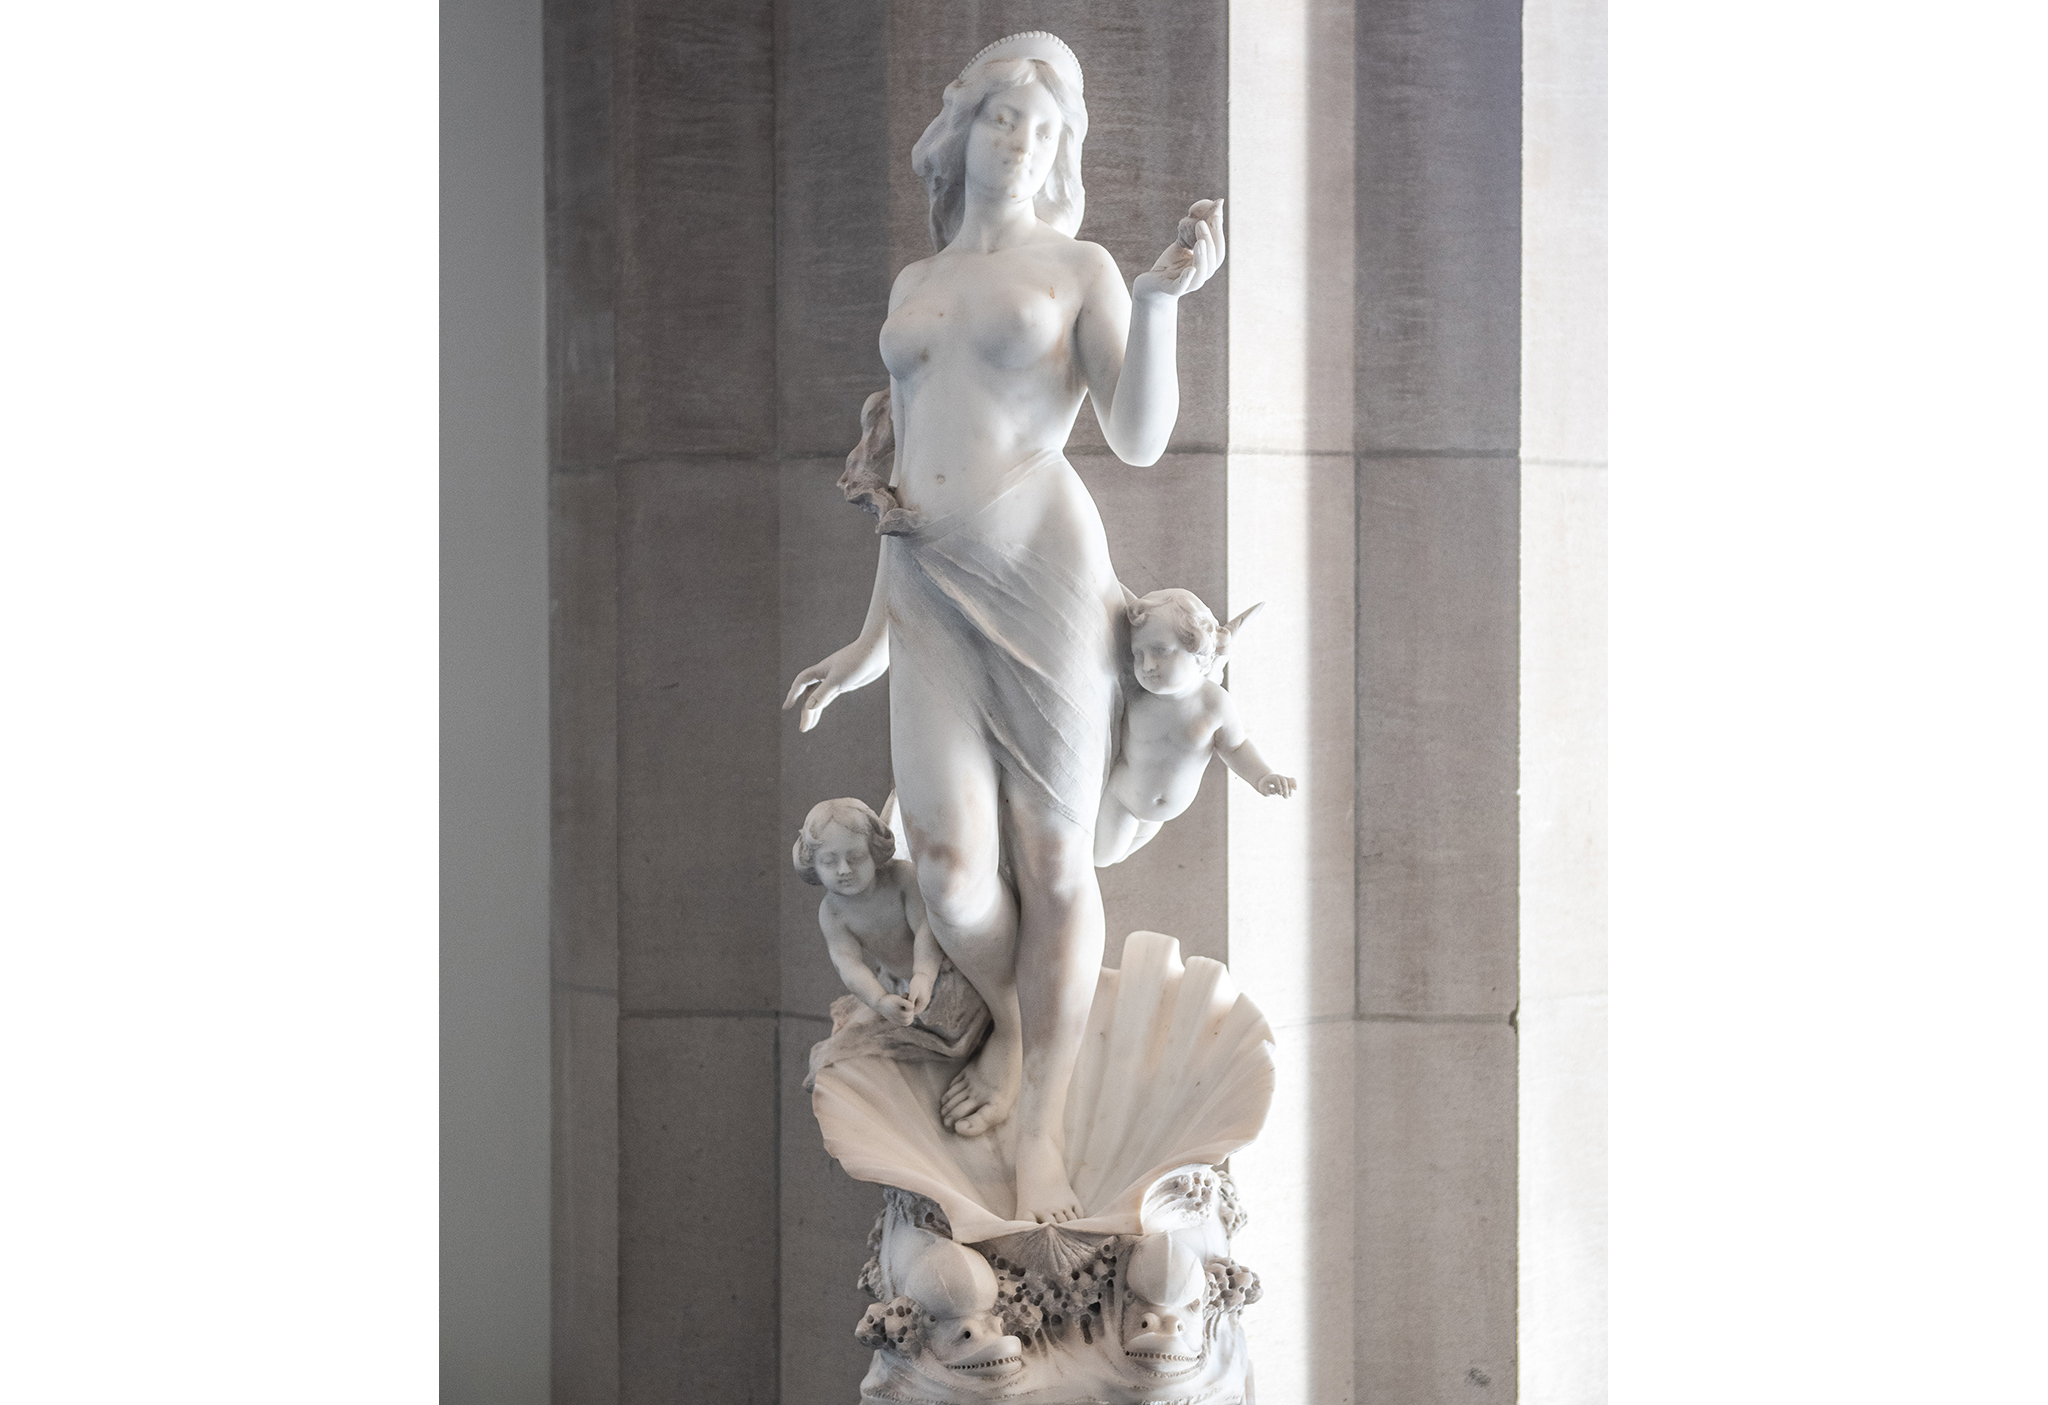 A statue of Venus emerging from the clamshell.